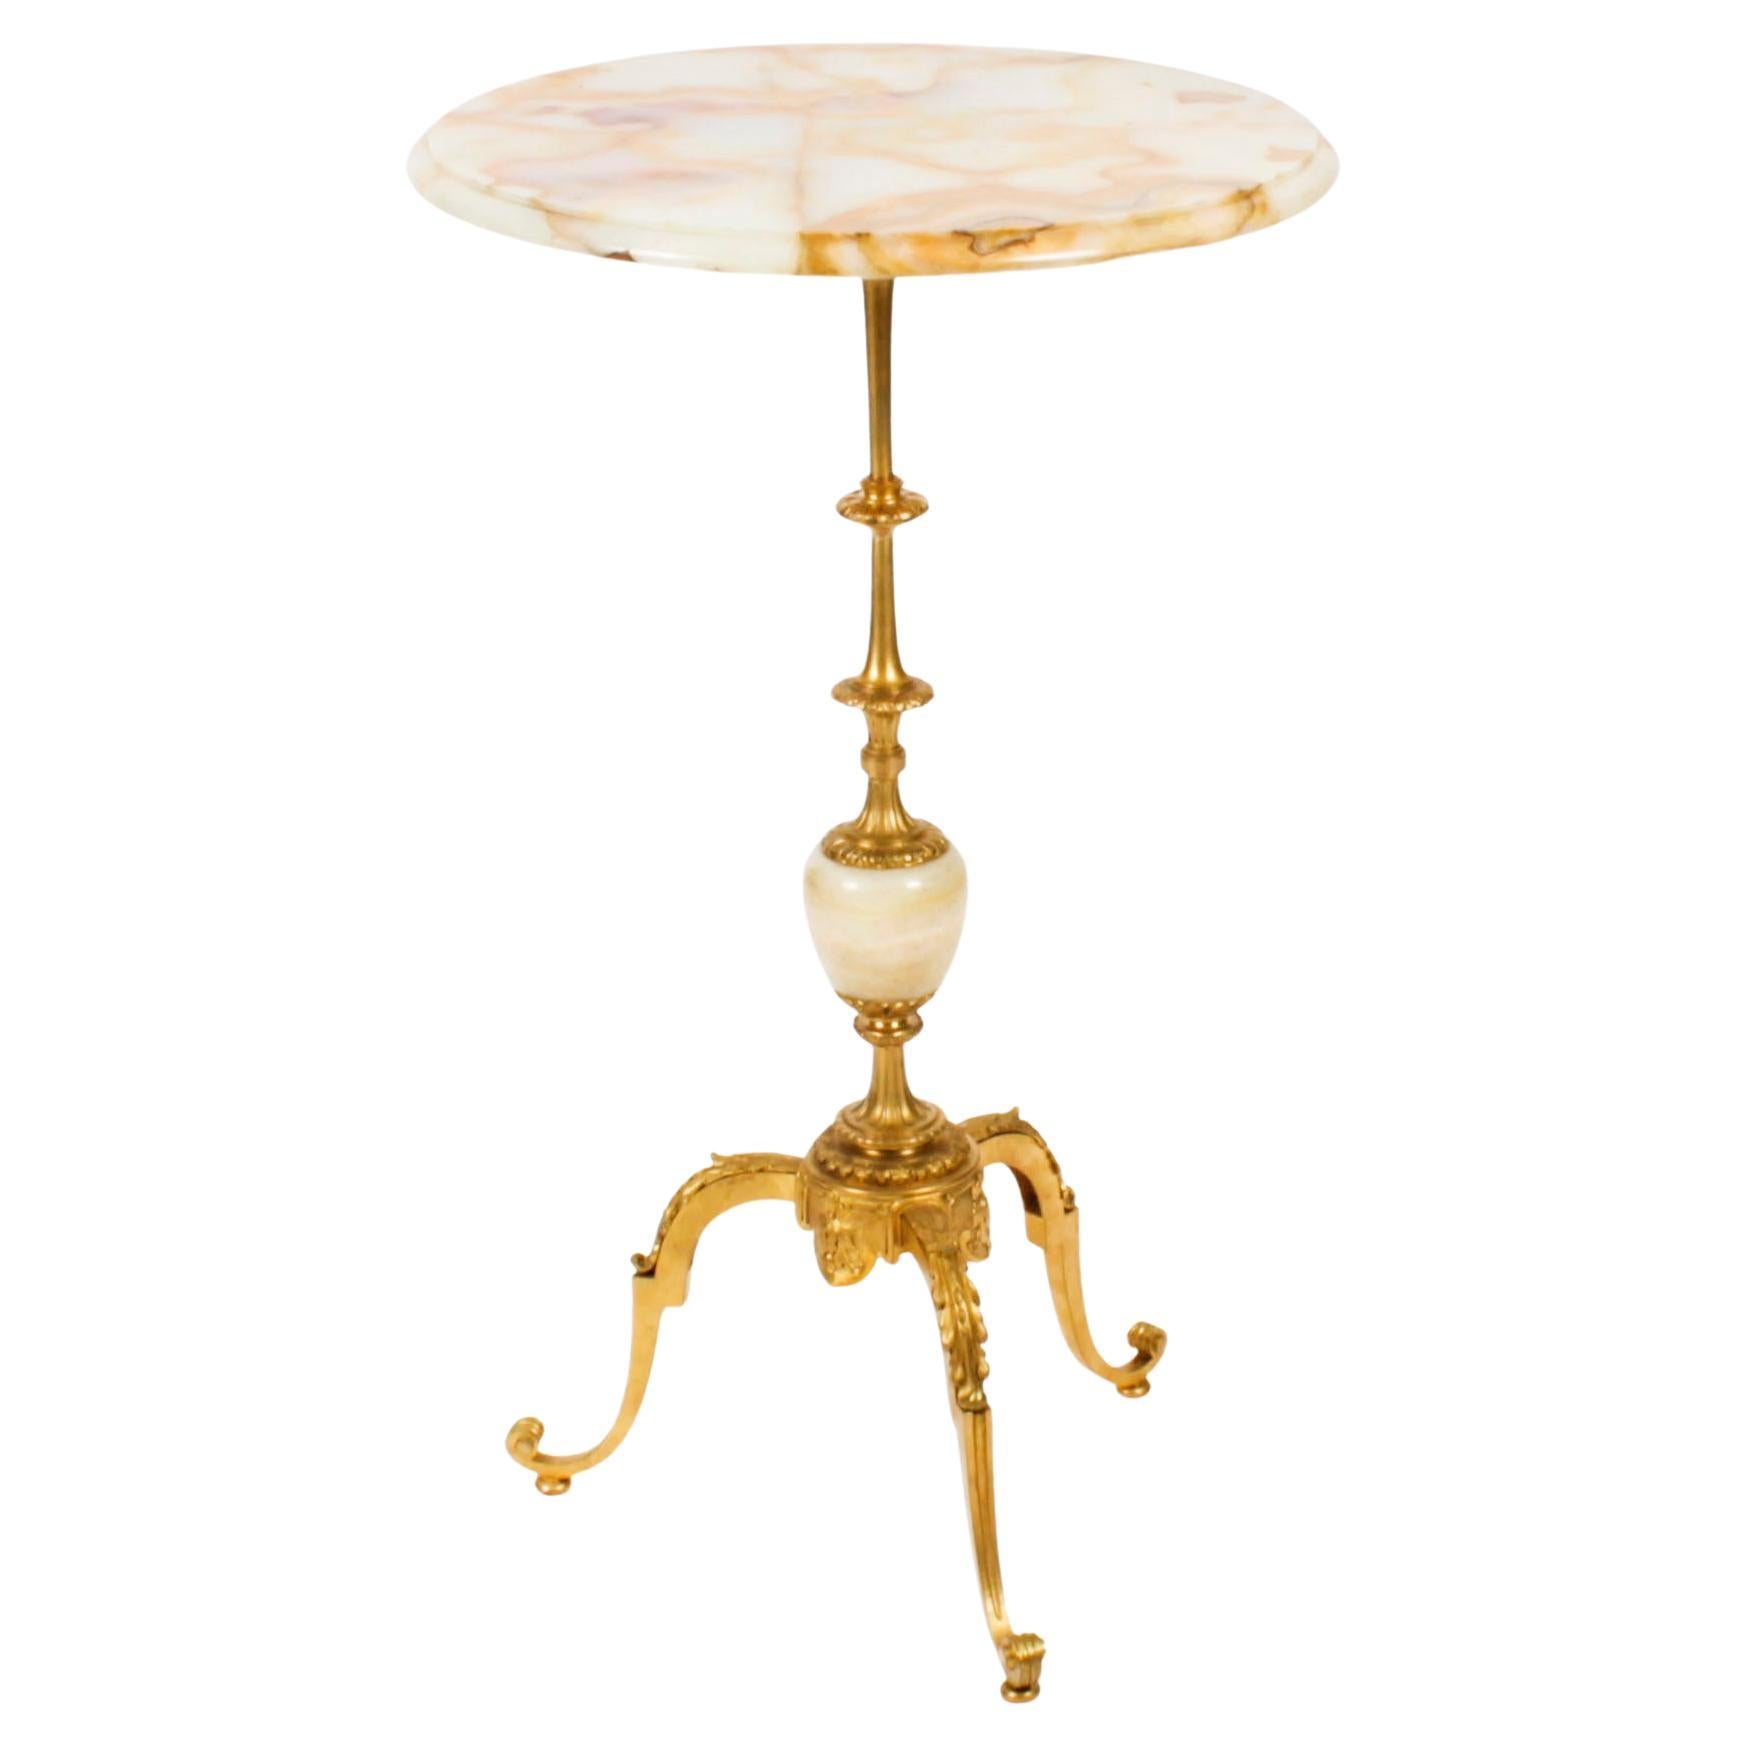 Antique French Ormolu Onyx Topped Occasional Table 19th Century For Sale